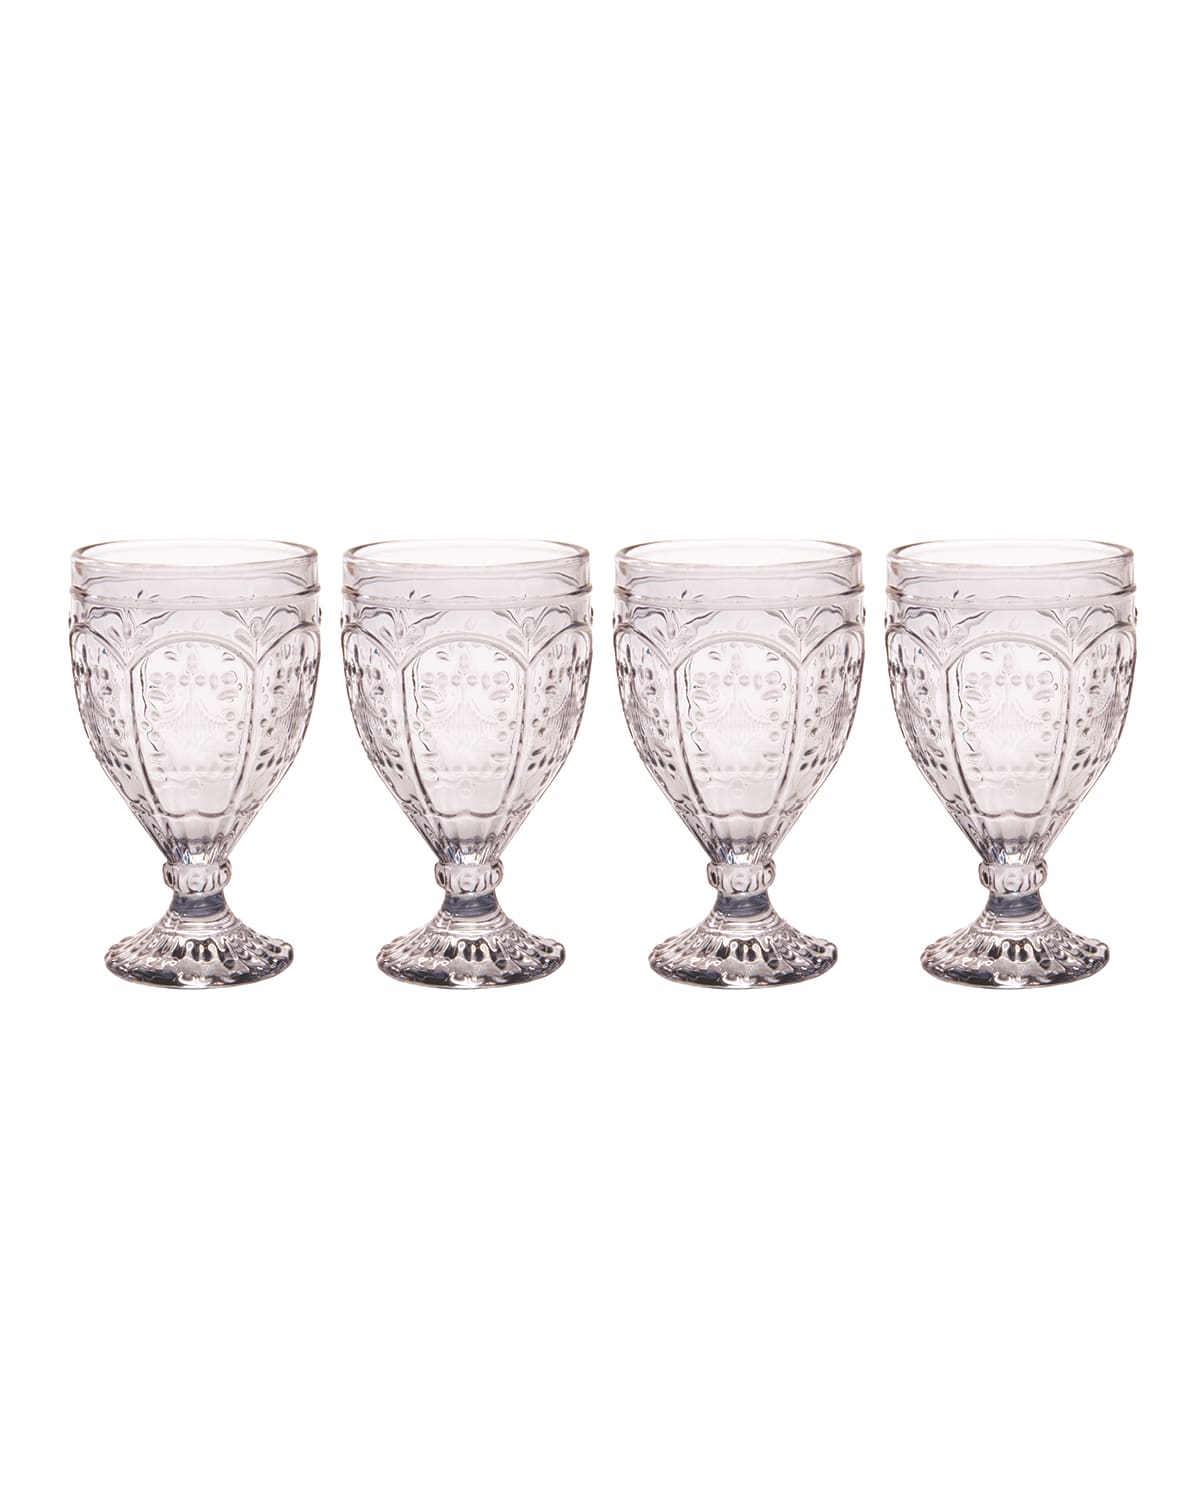 Fitz And Floyd Trestle Goblets, Set Of 4